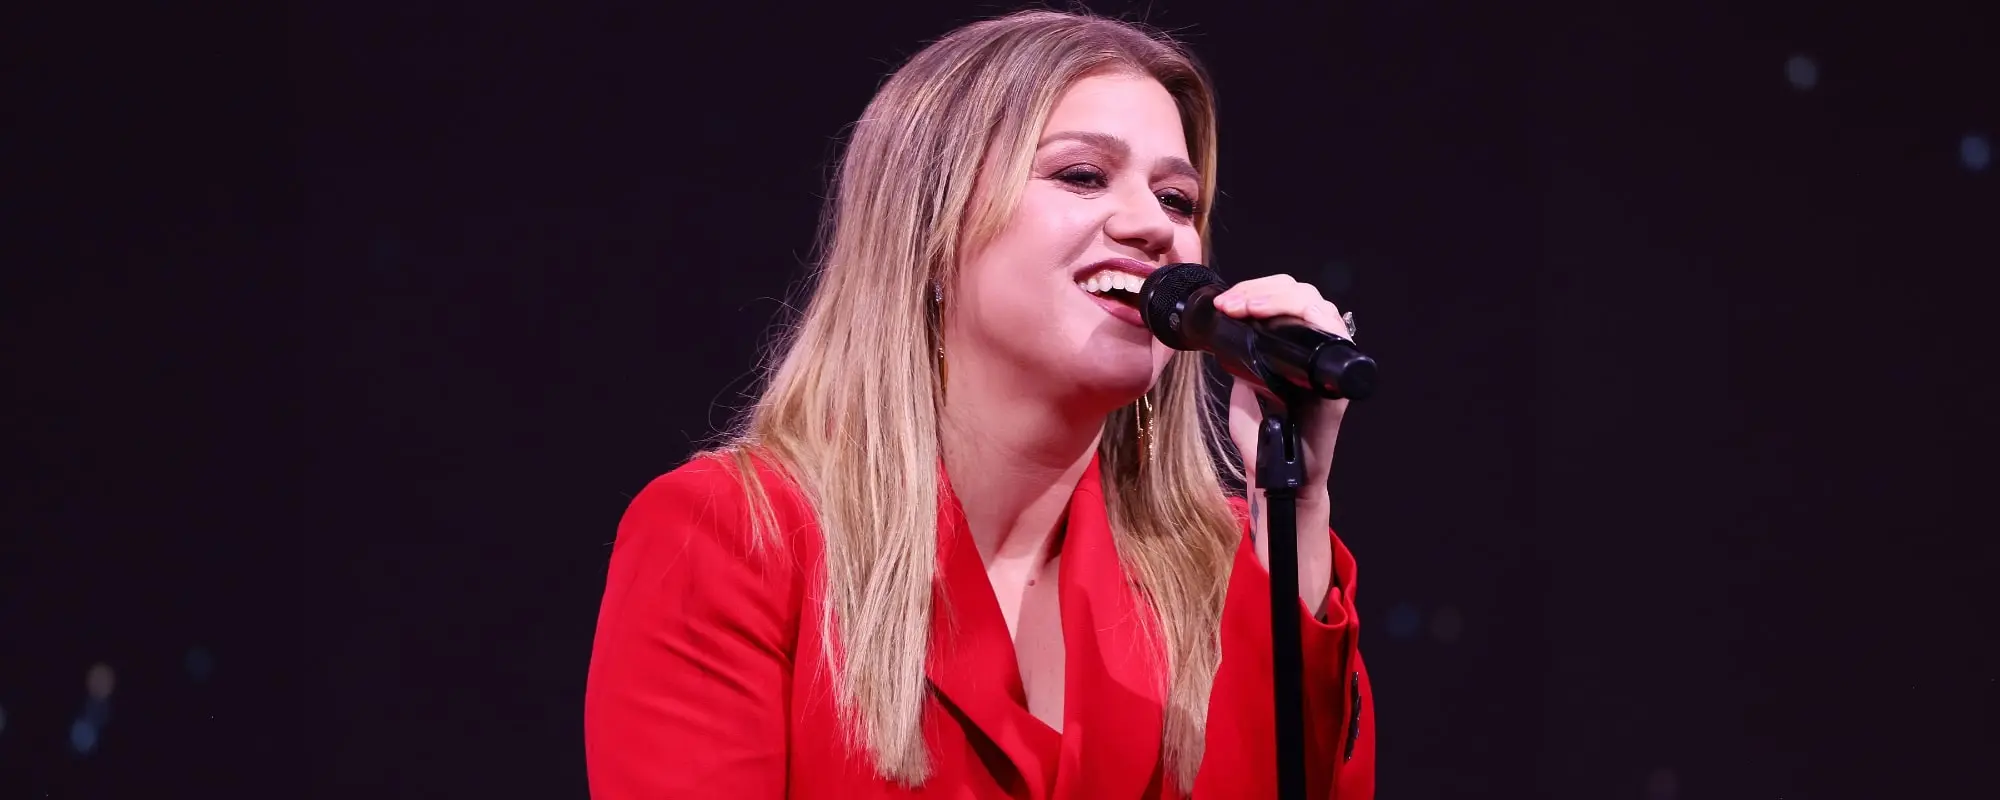 Watch Kelly Clarkson Deliver Chill-Inducing Cover of Chris Stapleton’s “White Horse”